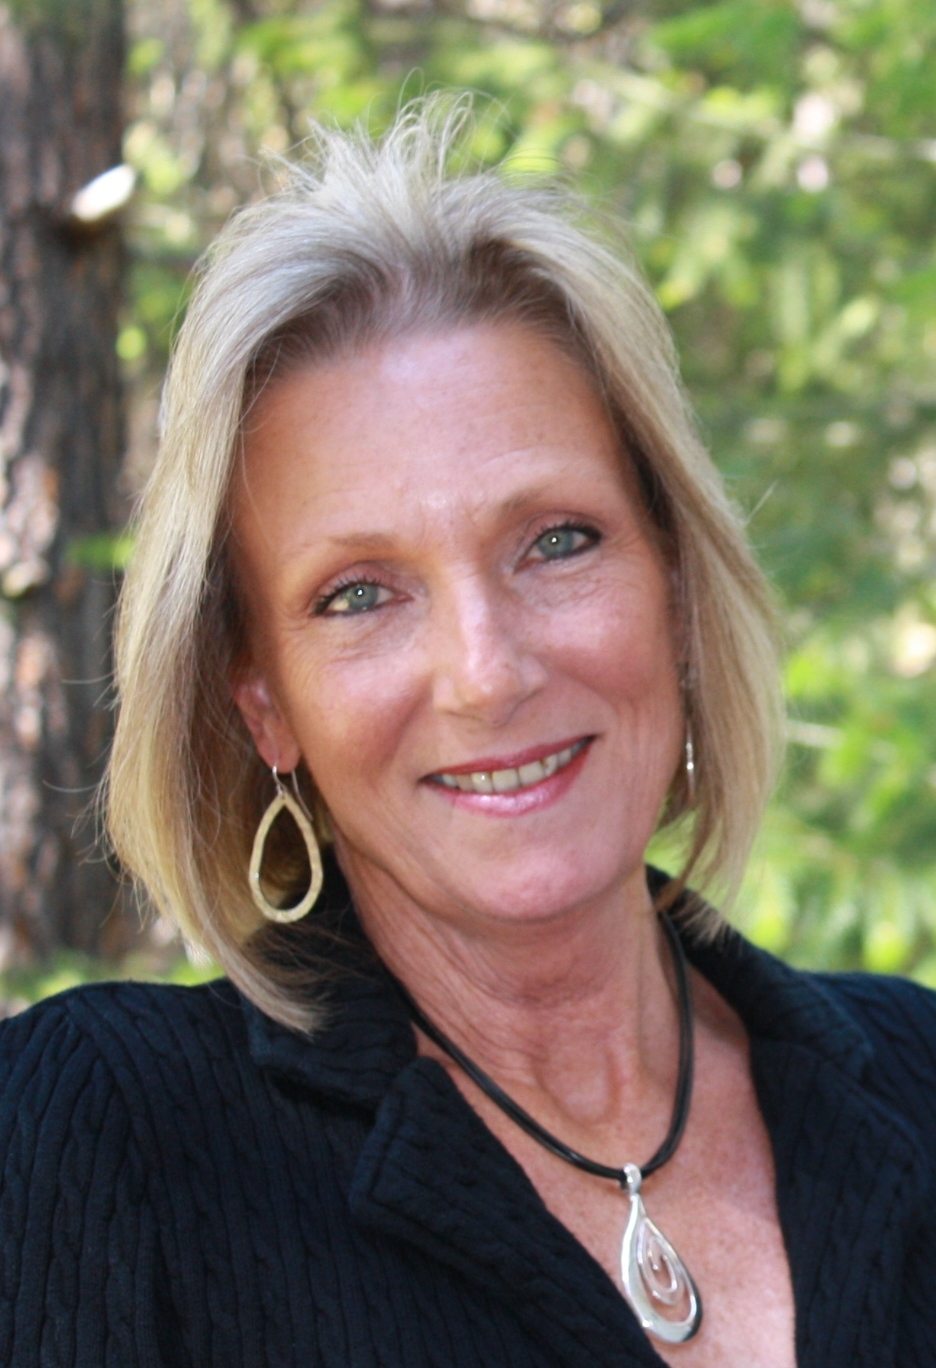 REALTOR Juli Thompson has joined the Graeagle office of Dickson Realty as a residential real estate agent.